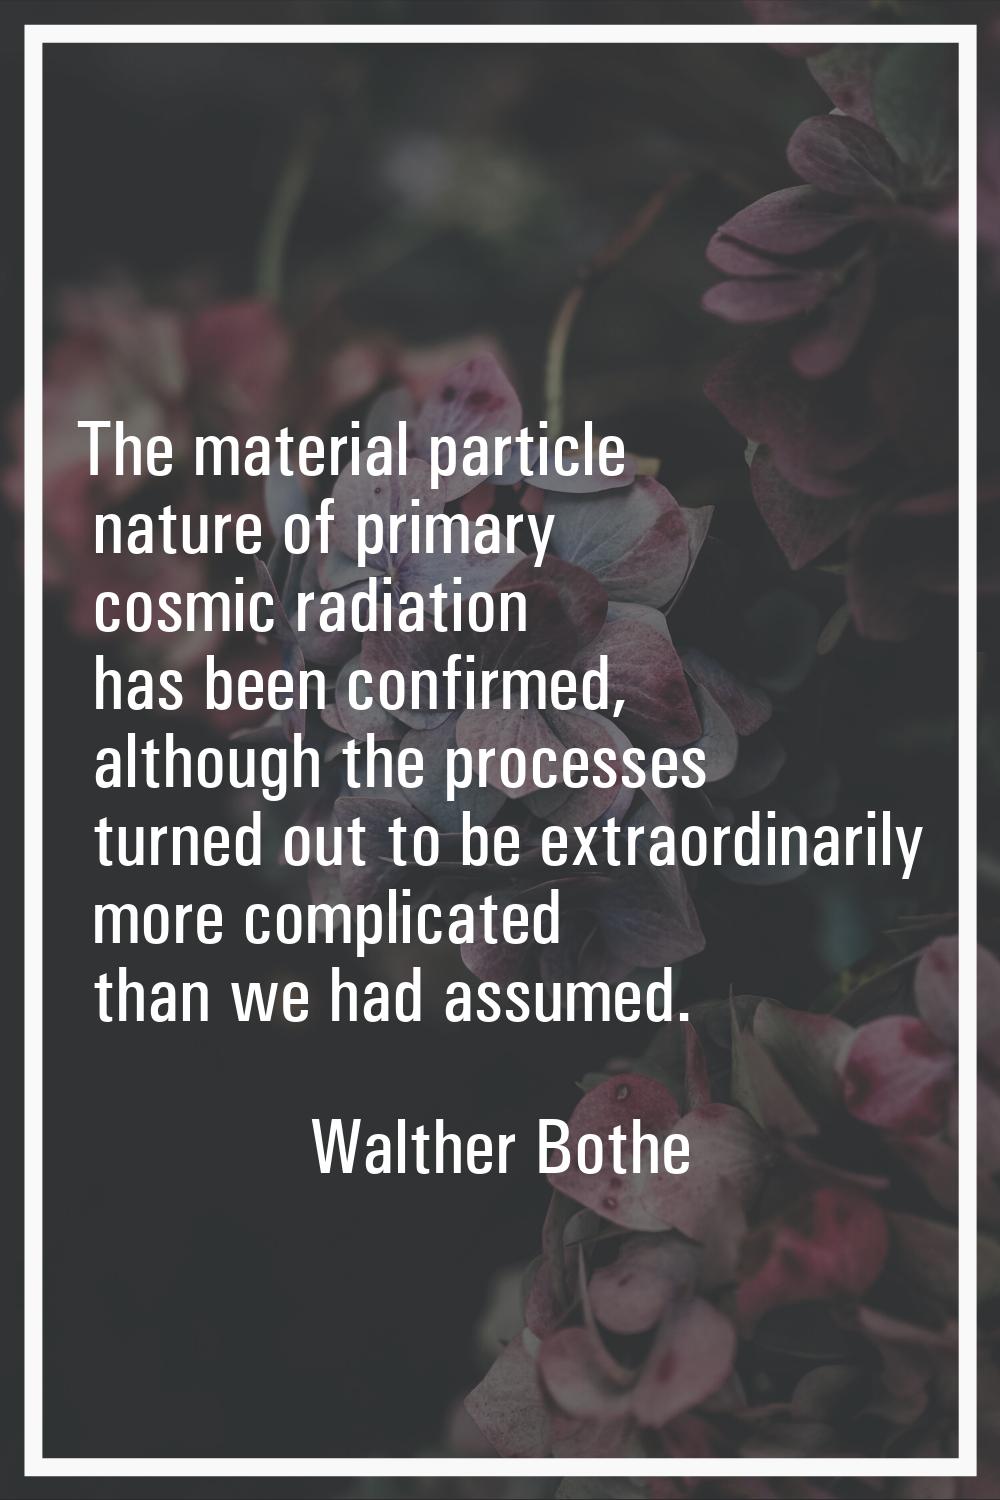 The material particle nature of primary cosmic radiation has been confirmed, although the processes